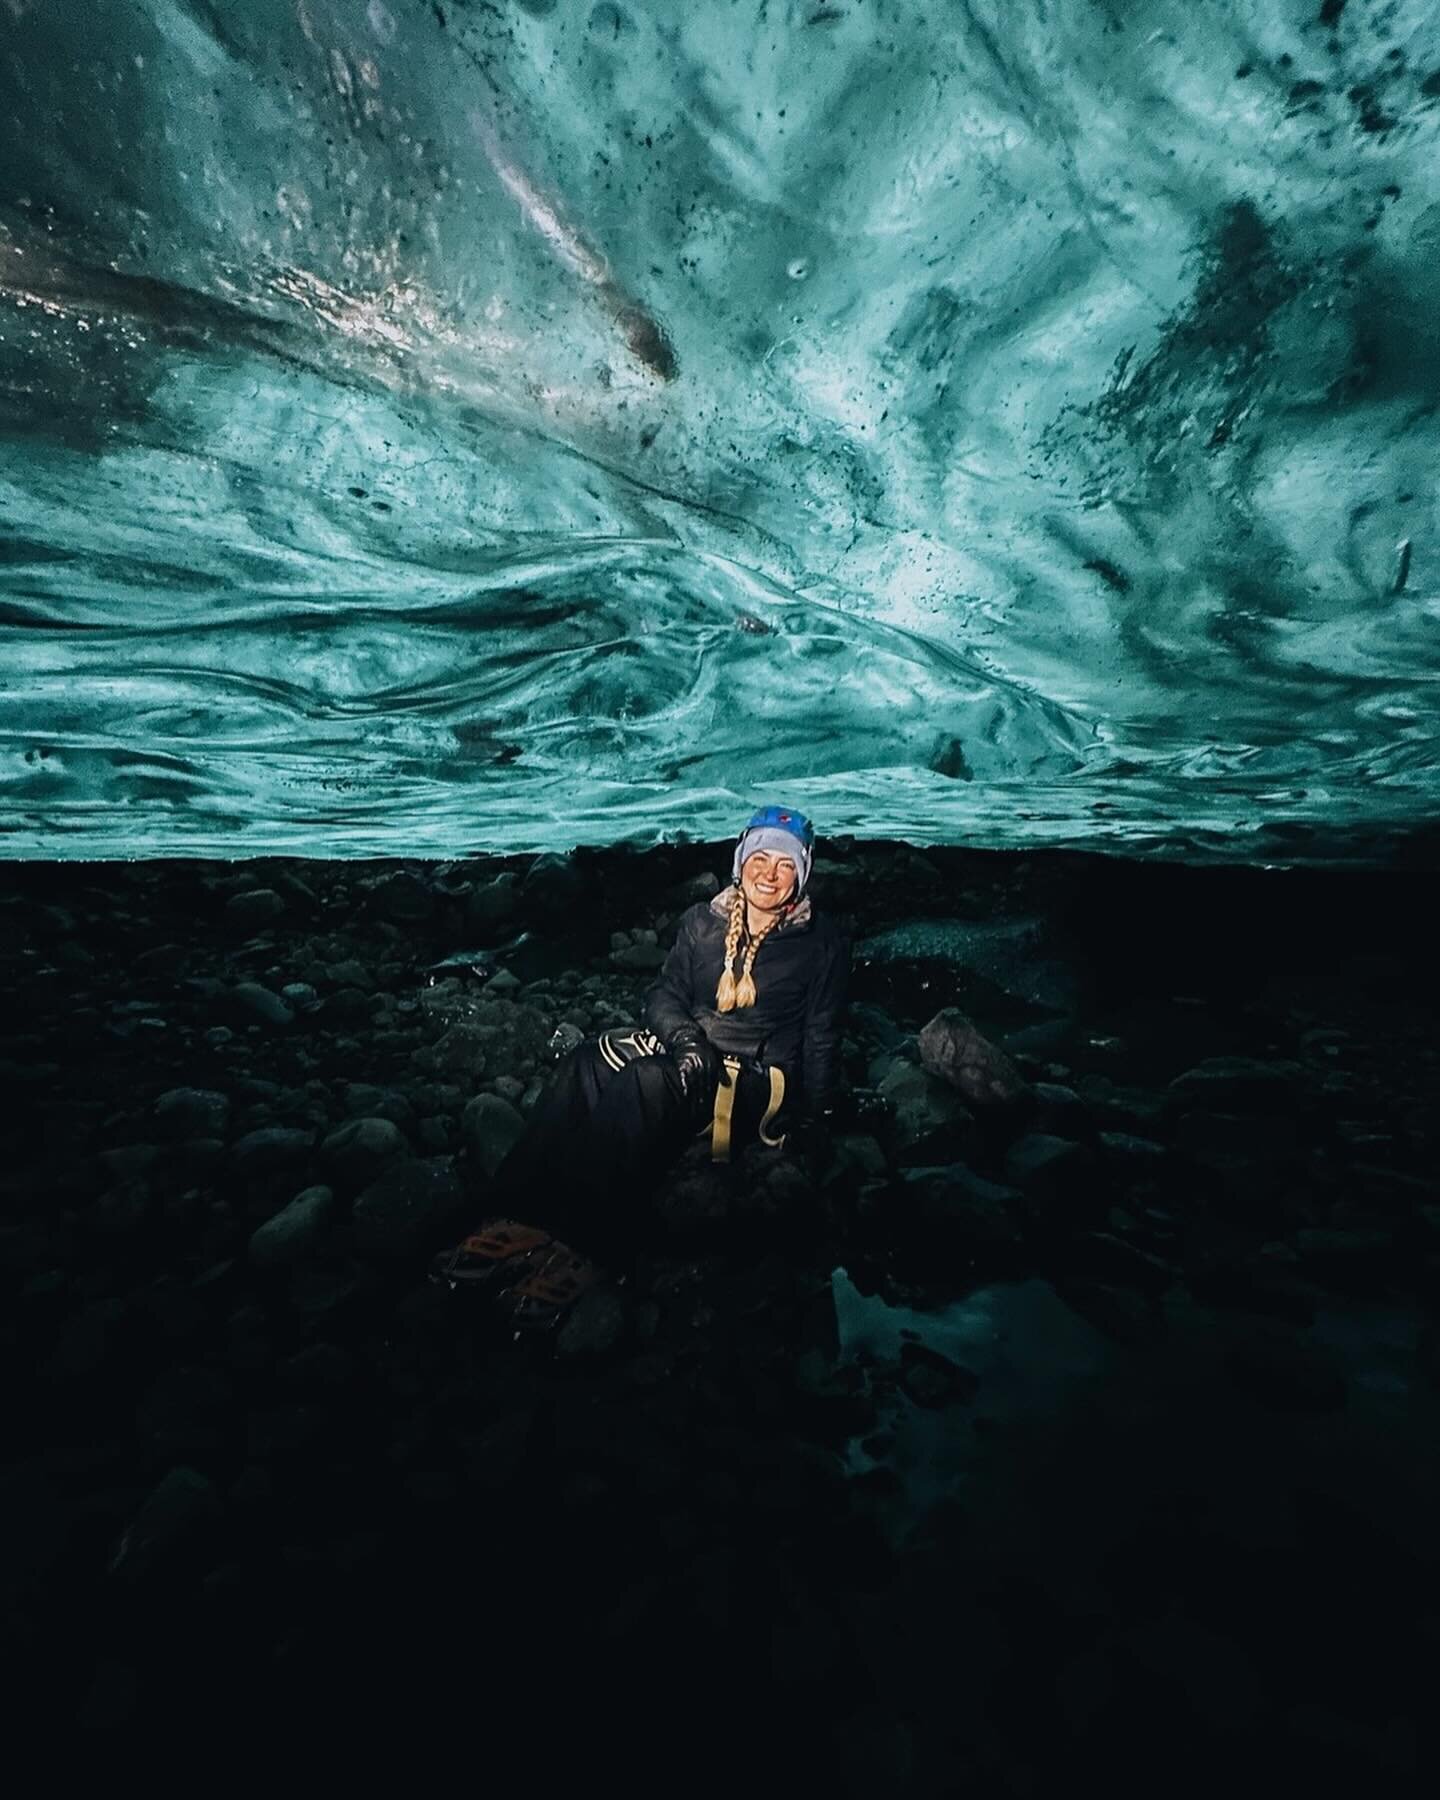 One of the coolest experiences of this trip!! All decked out in our full glacier hiking gear. We did the Treasure Iceland 5-7 hour Ice Cave tour with @blue_iceland_glacier_tours where we went inside Vatnajokull icecap and it was absolutely incredible